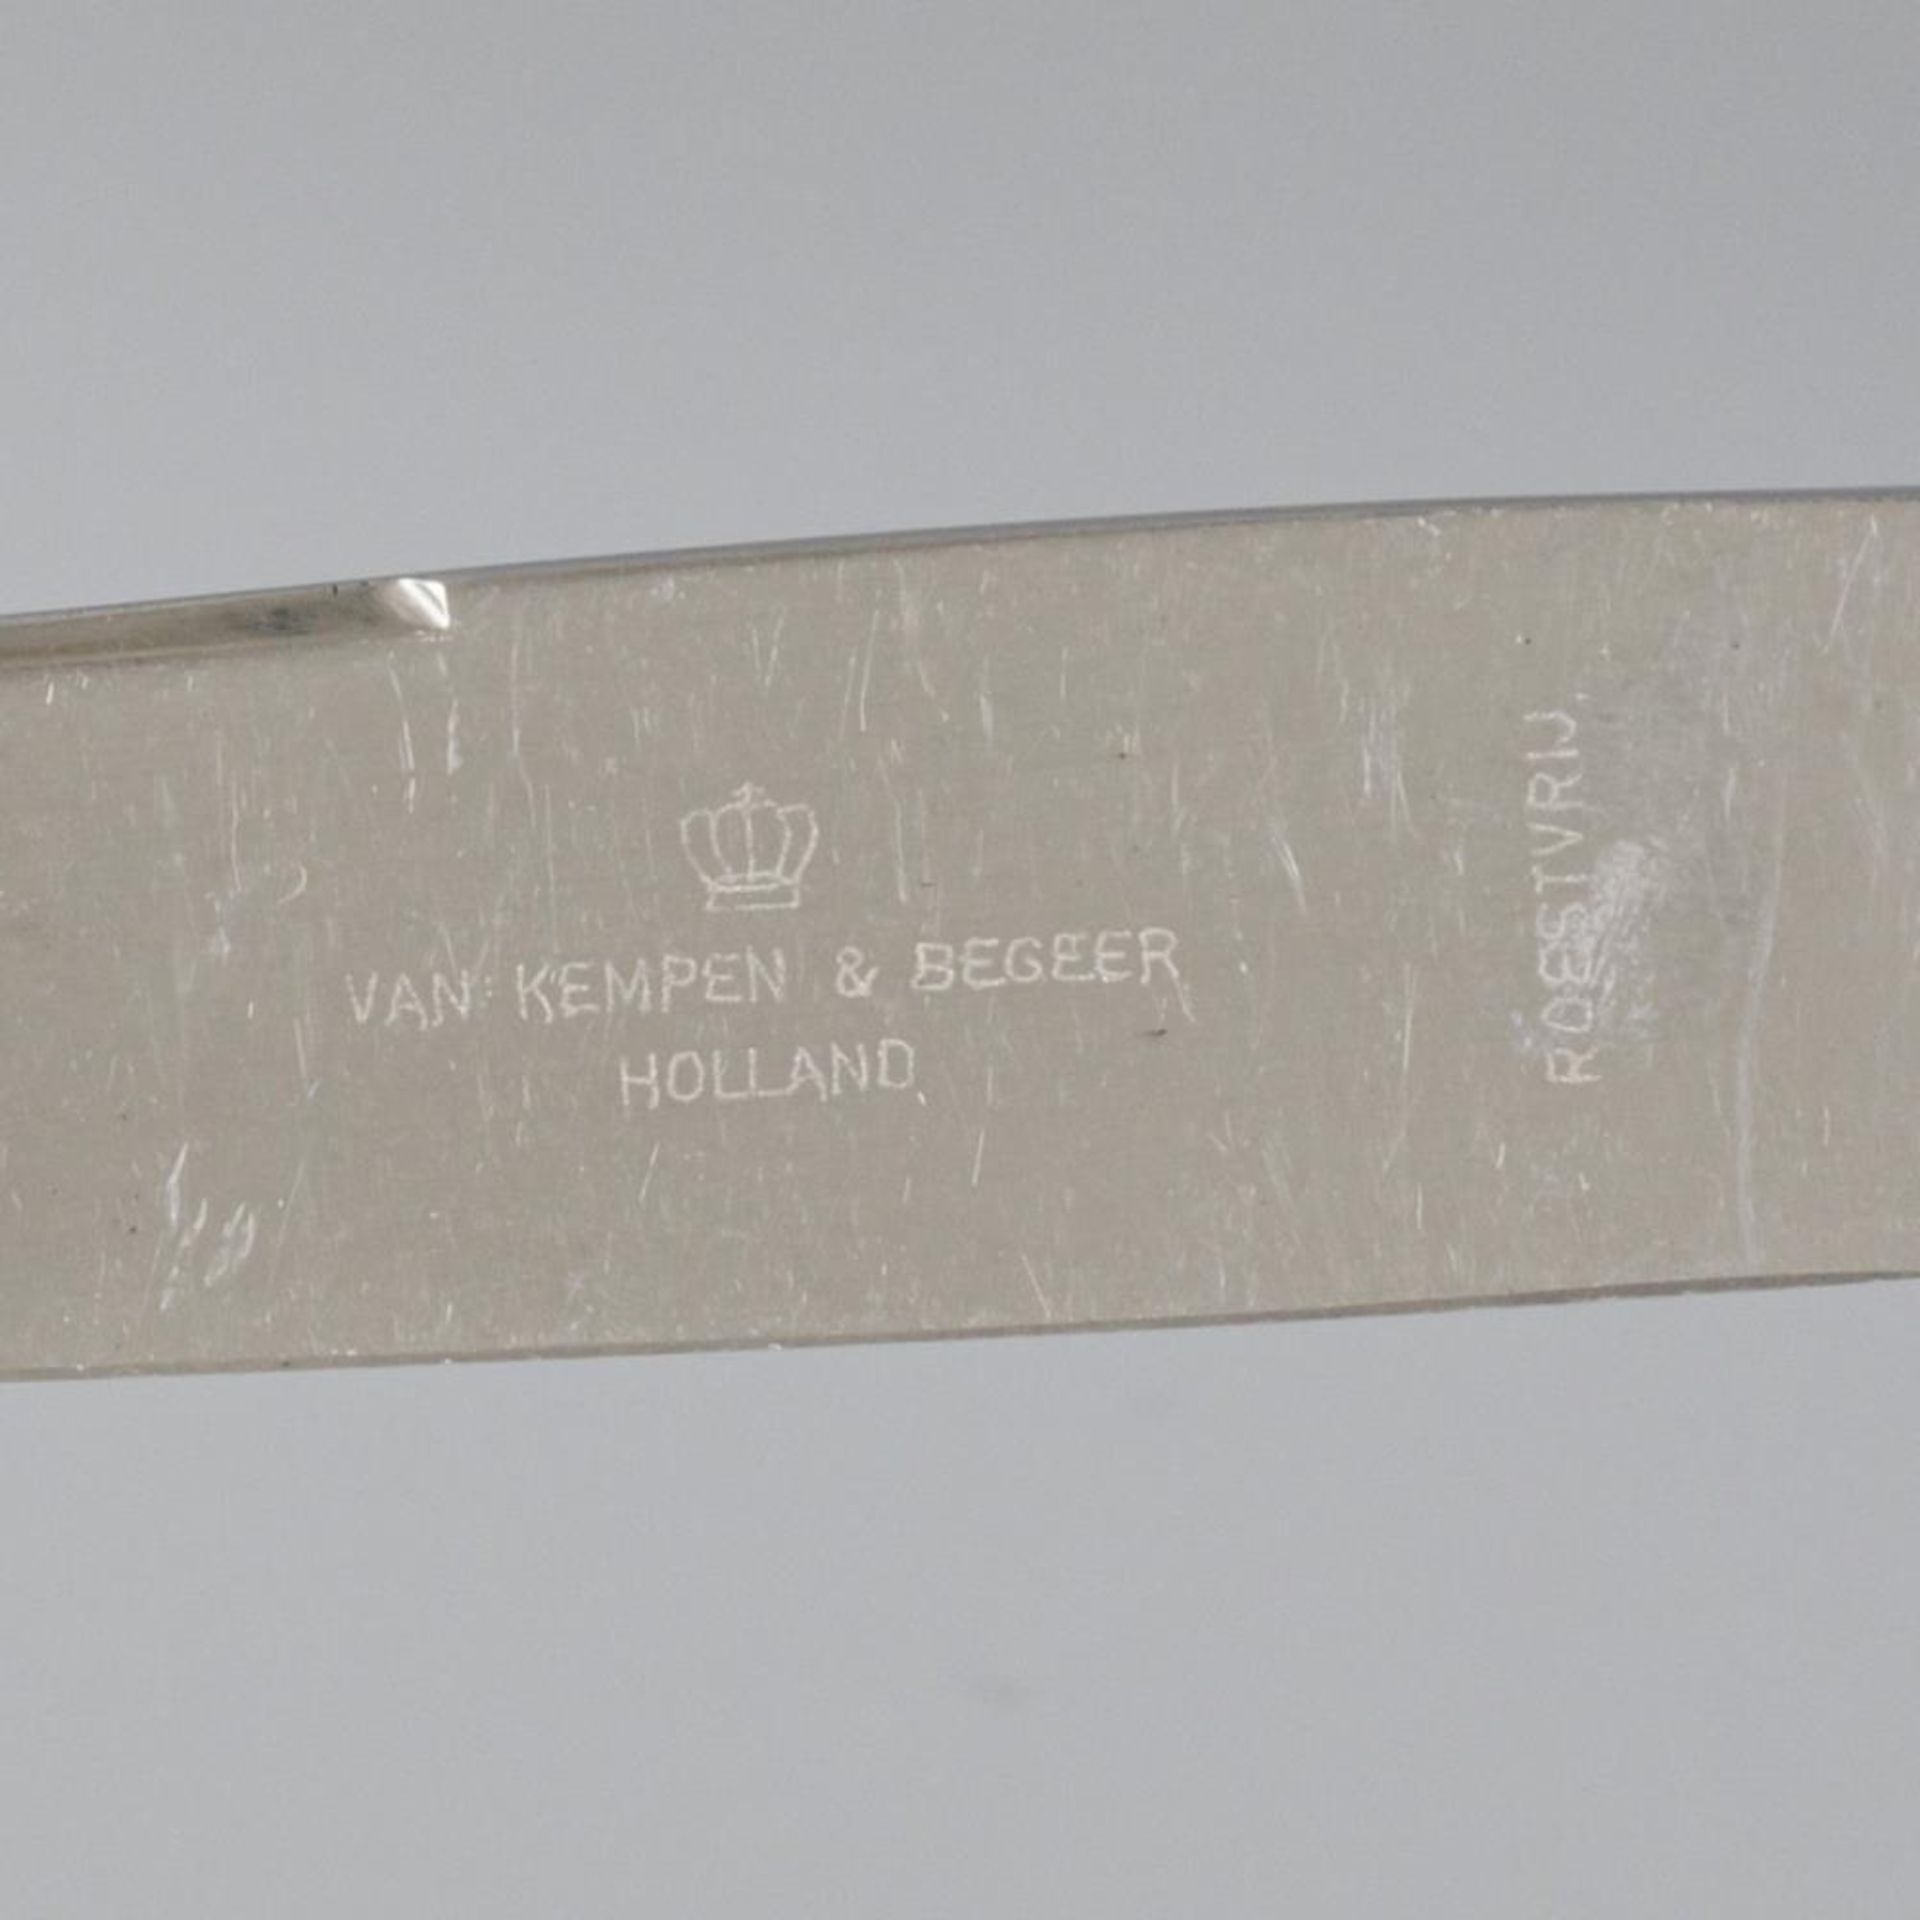 8 piece set of knives silver. - Image 5 of 5